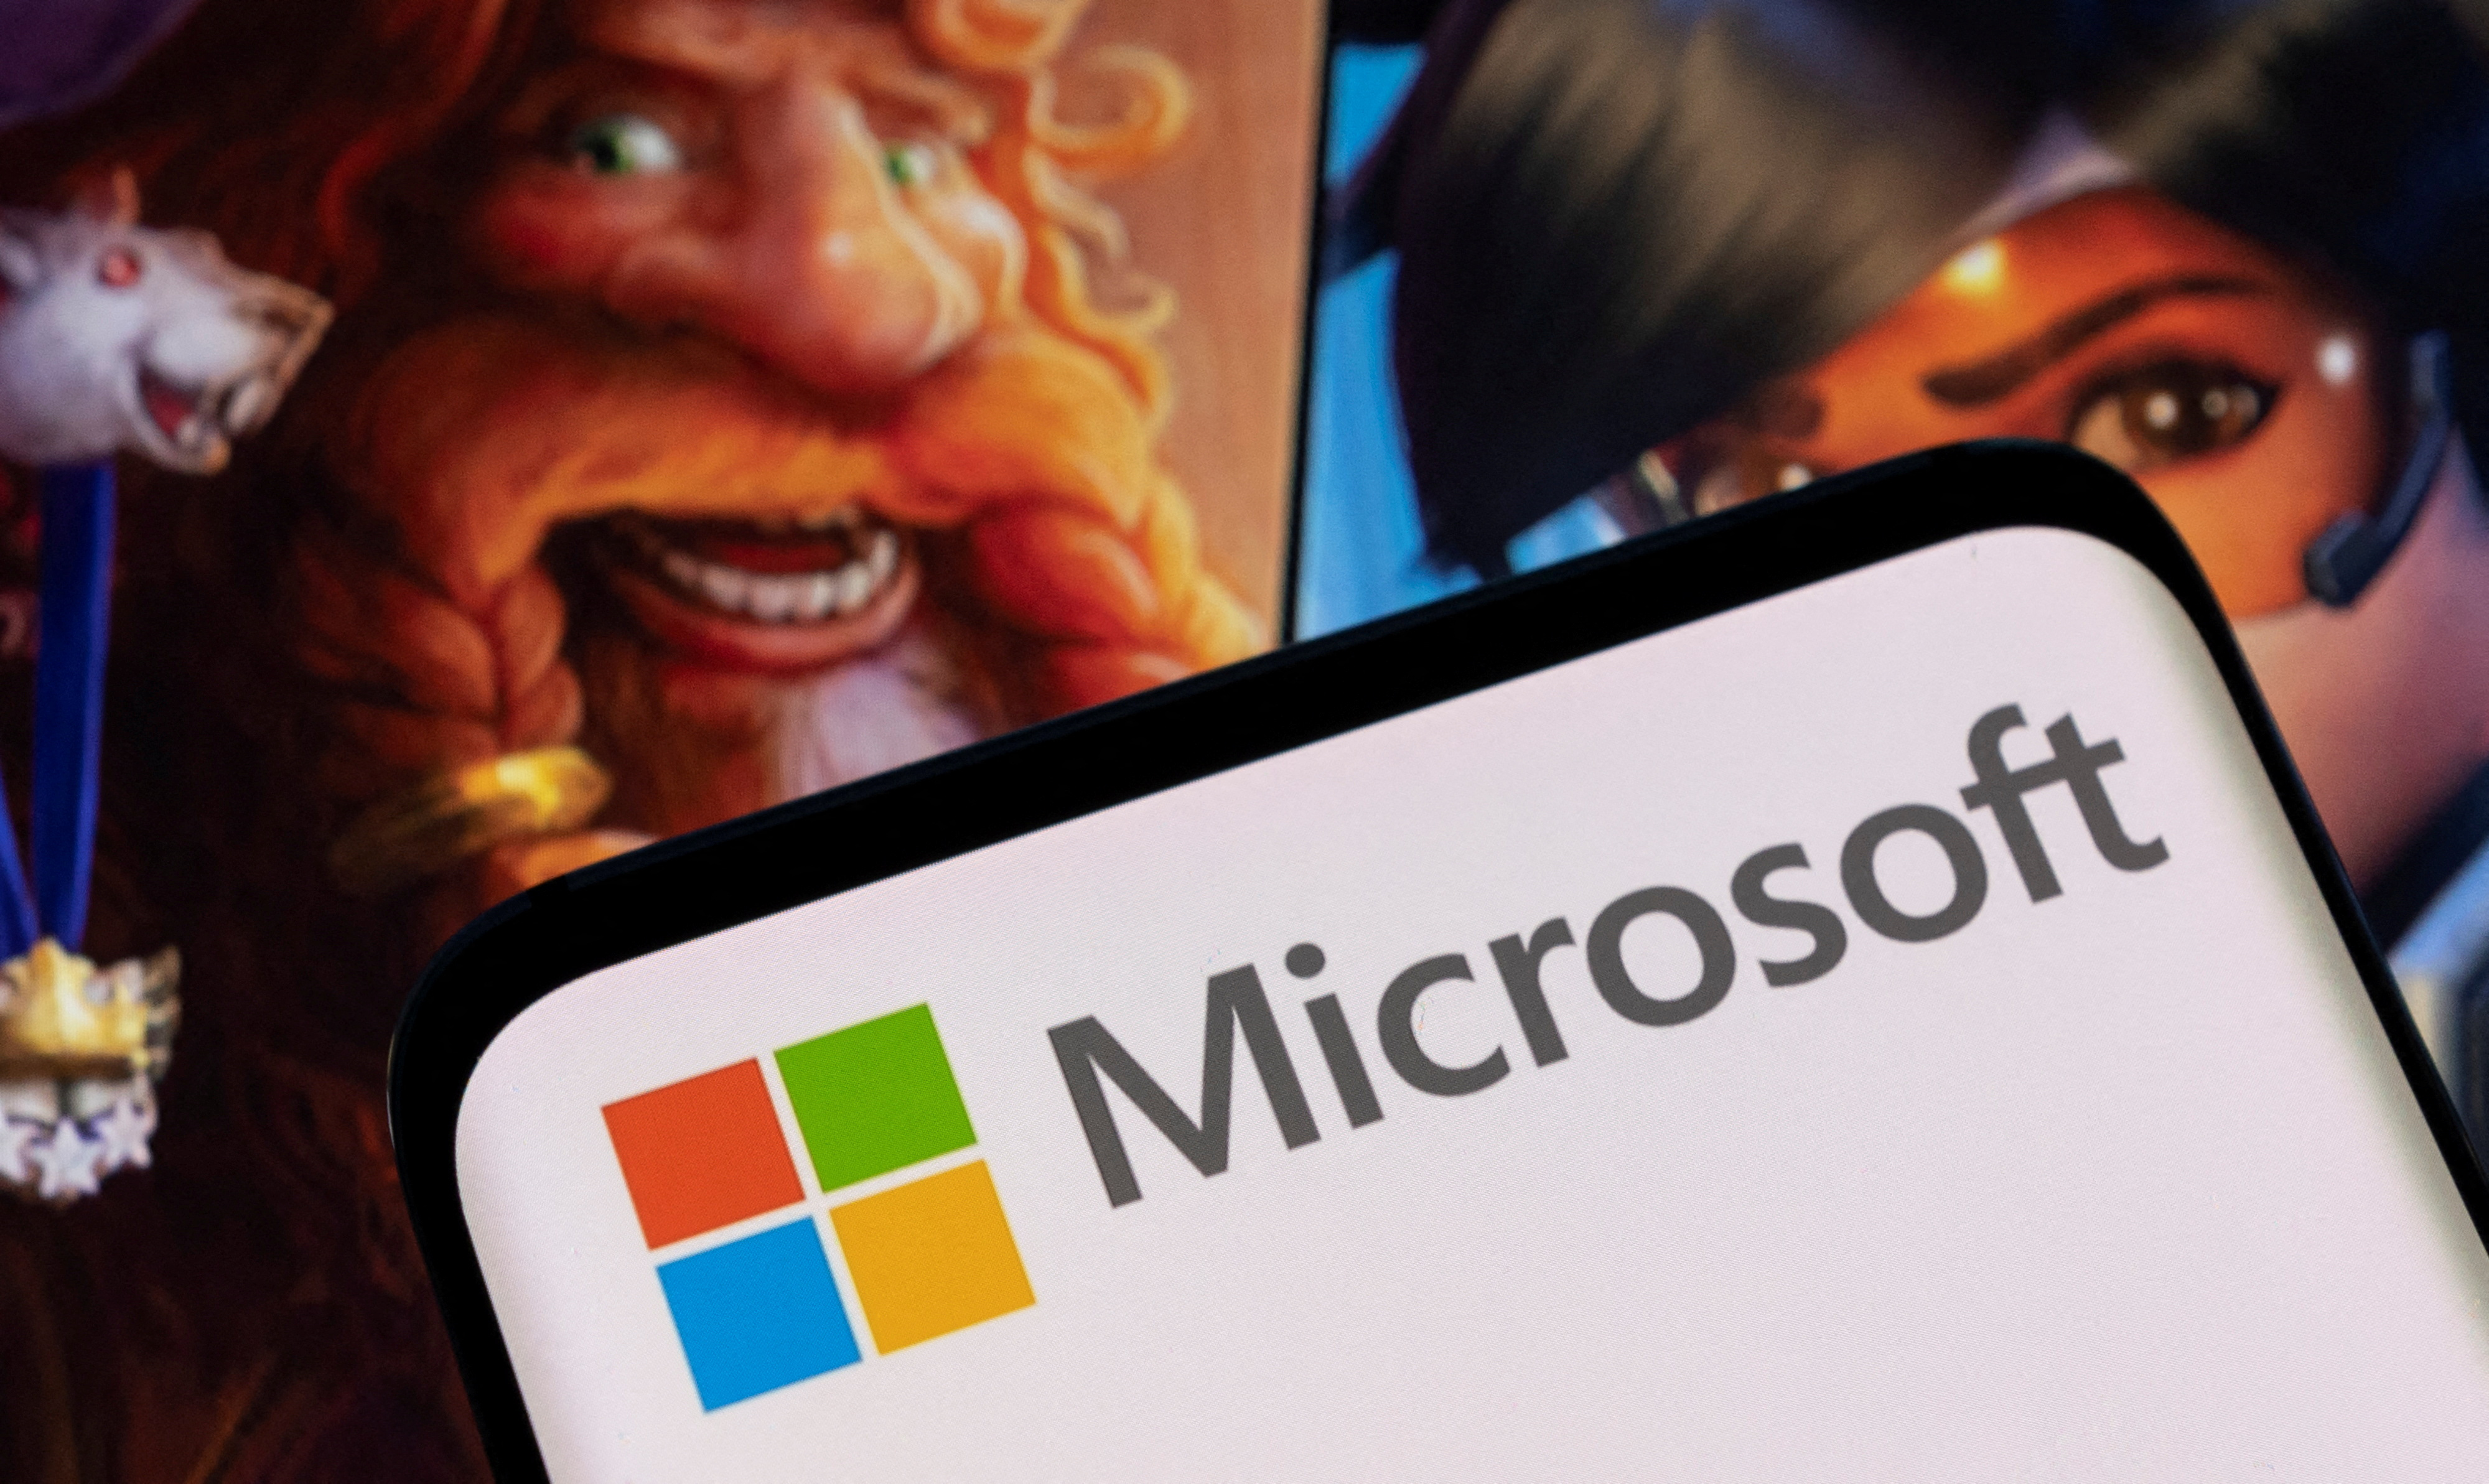 CMA gives final approval for Microsoft's Activision Blizzard